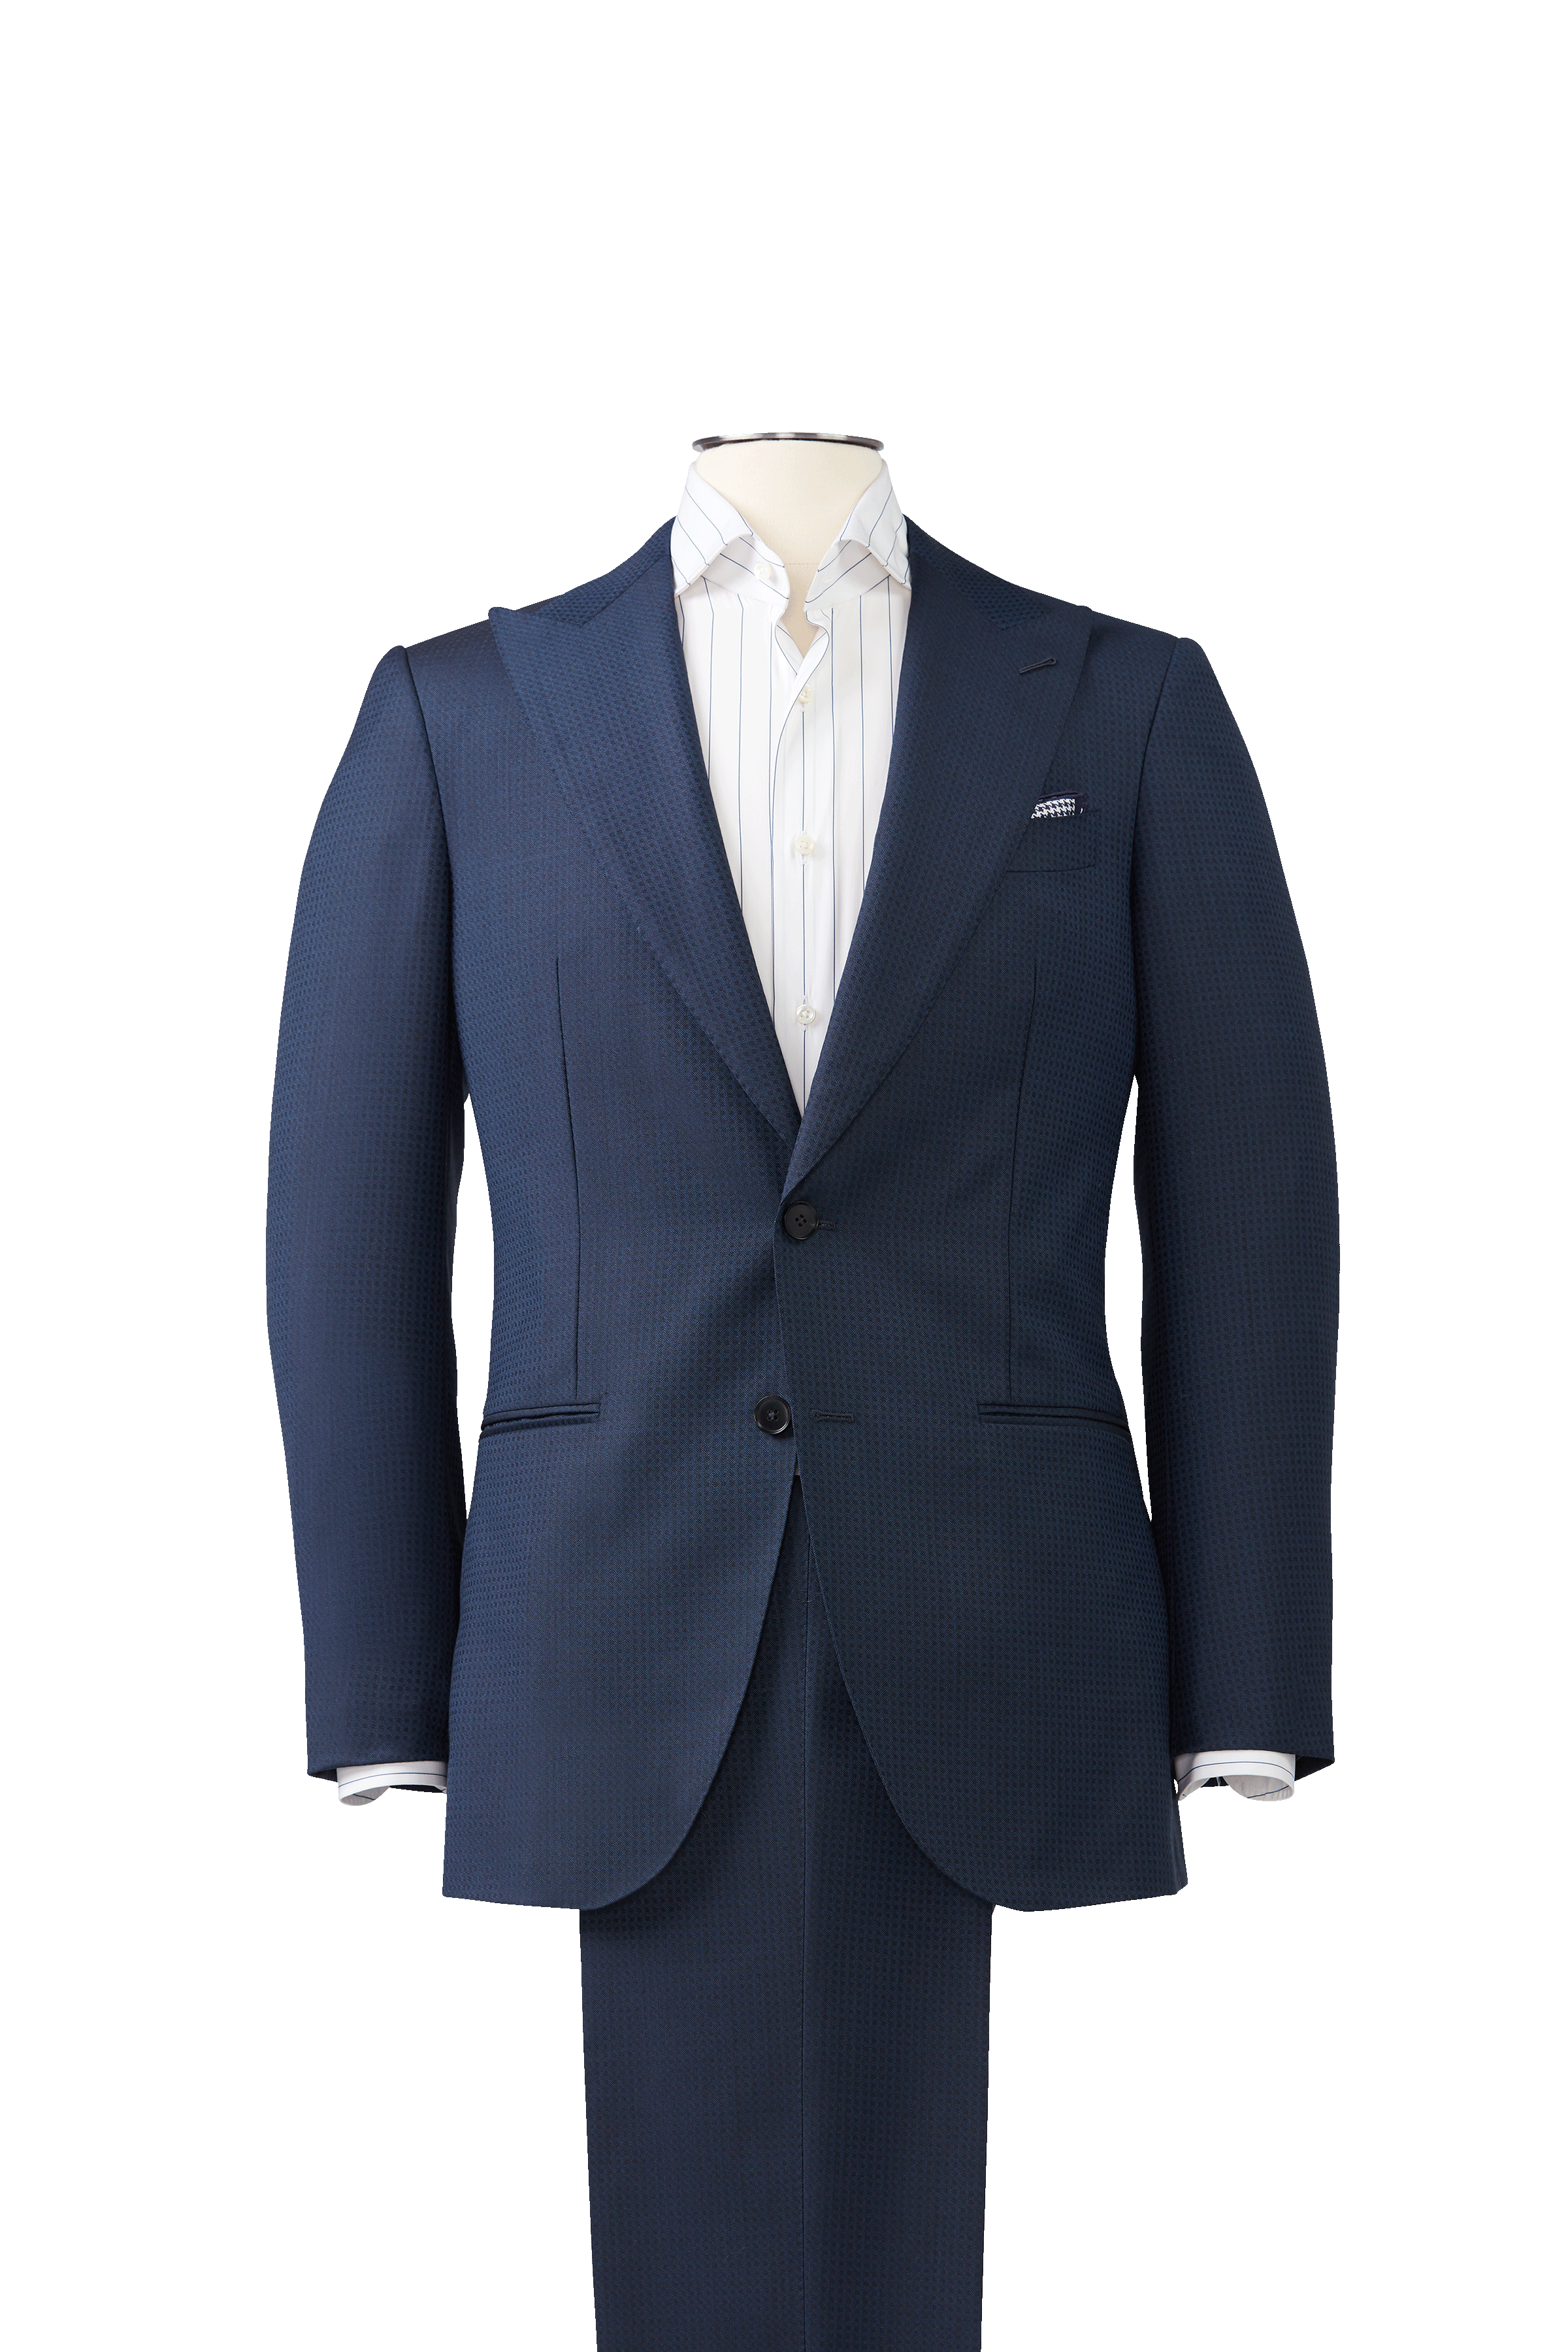 by Navy Dormeuil Knot Check Standard Suit